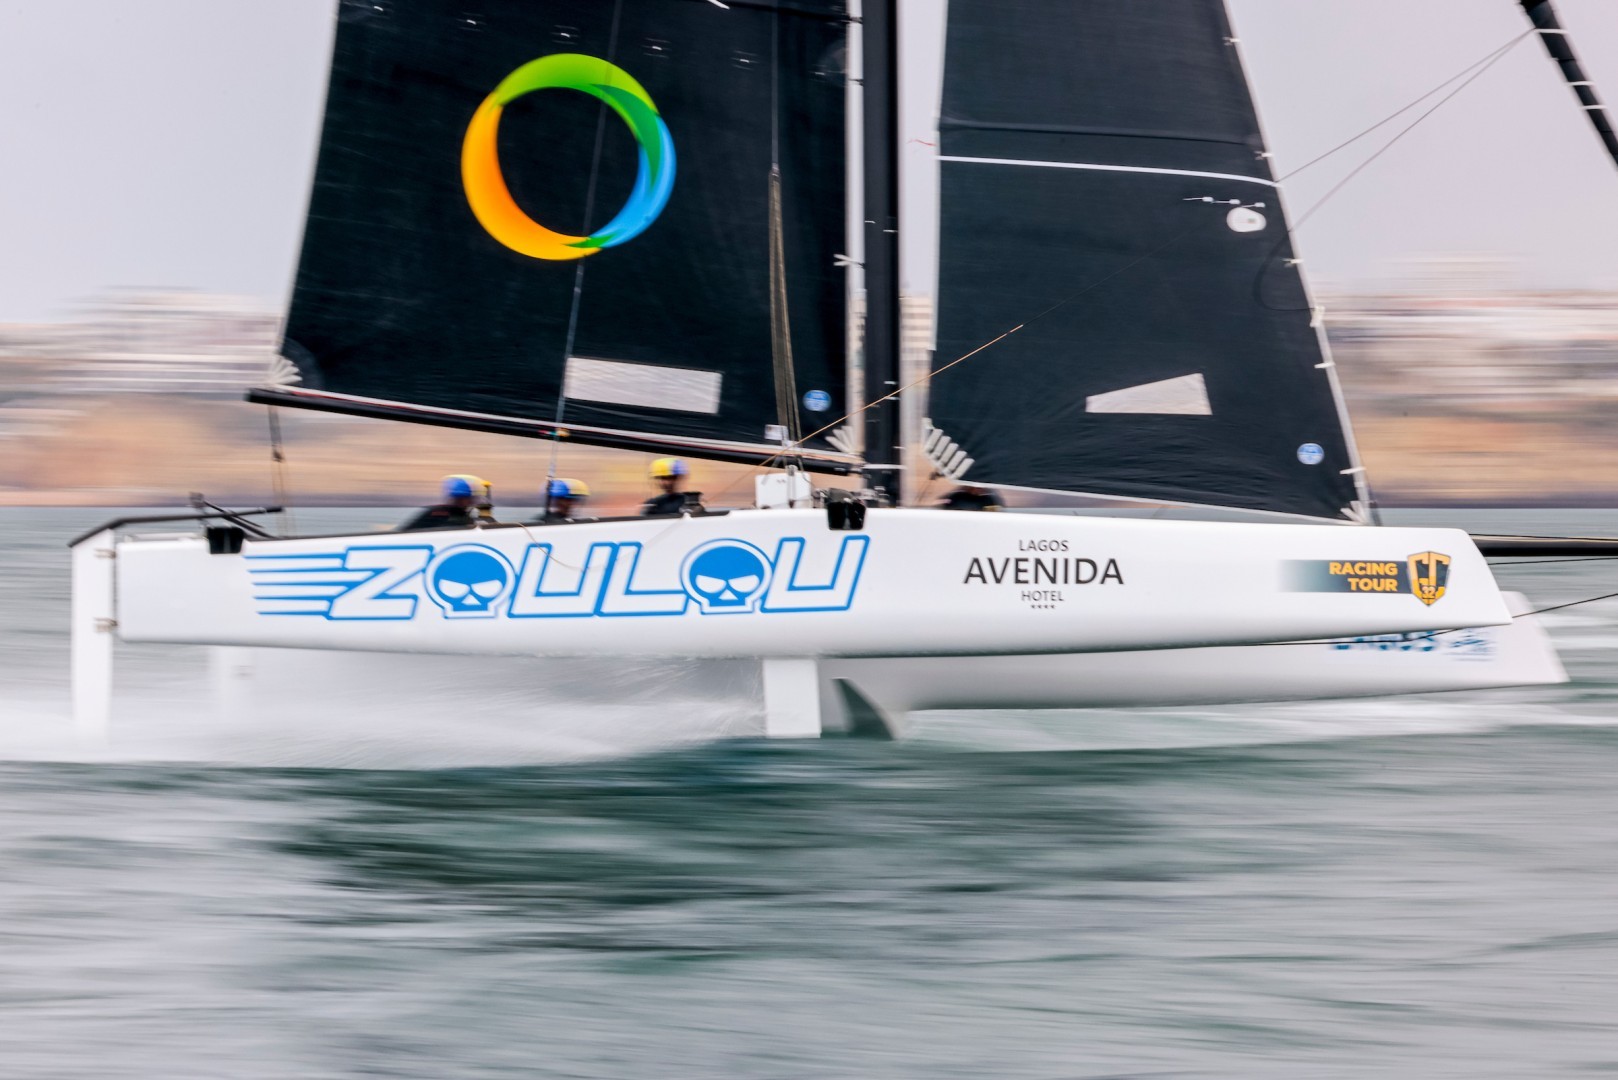 Erik Maris' Zoulou currently leads the 2022 GC32 Racing Tour's Owner-Driver Championship